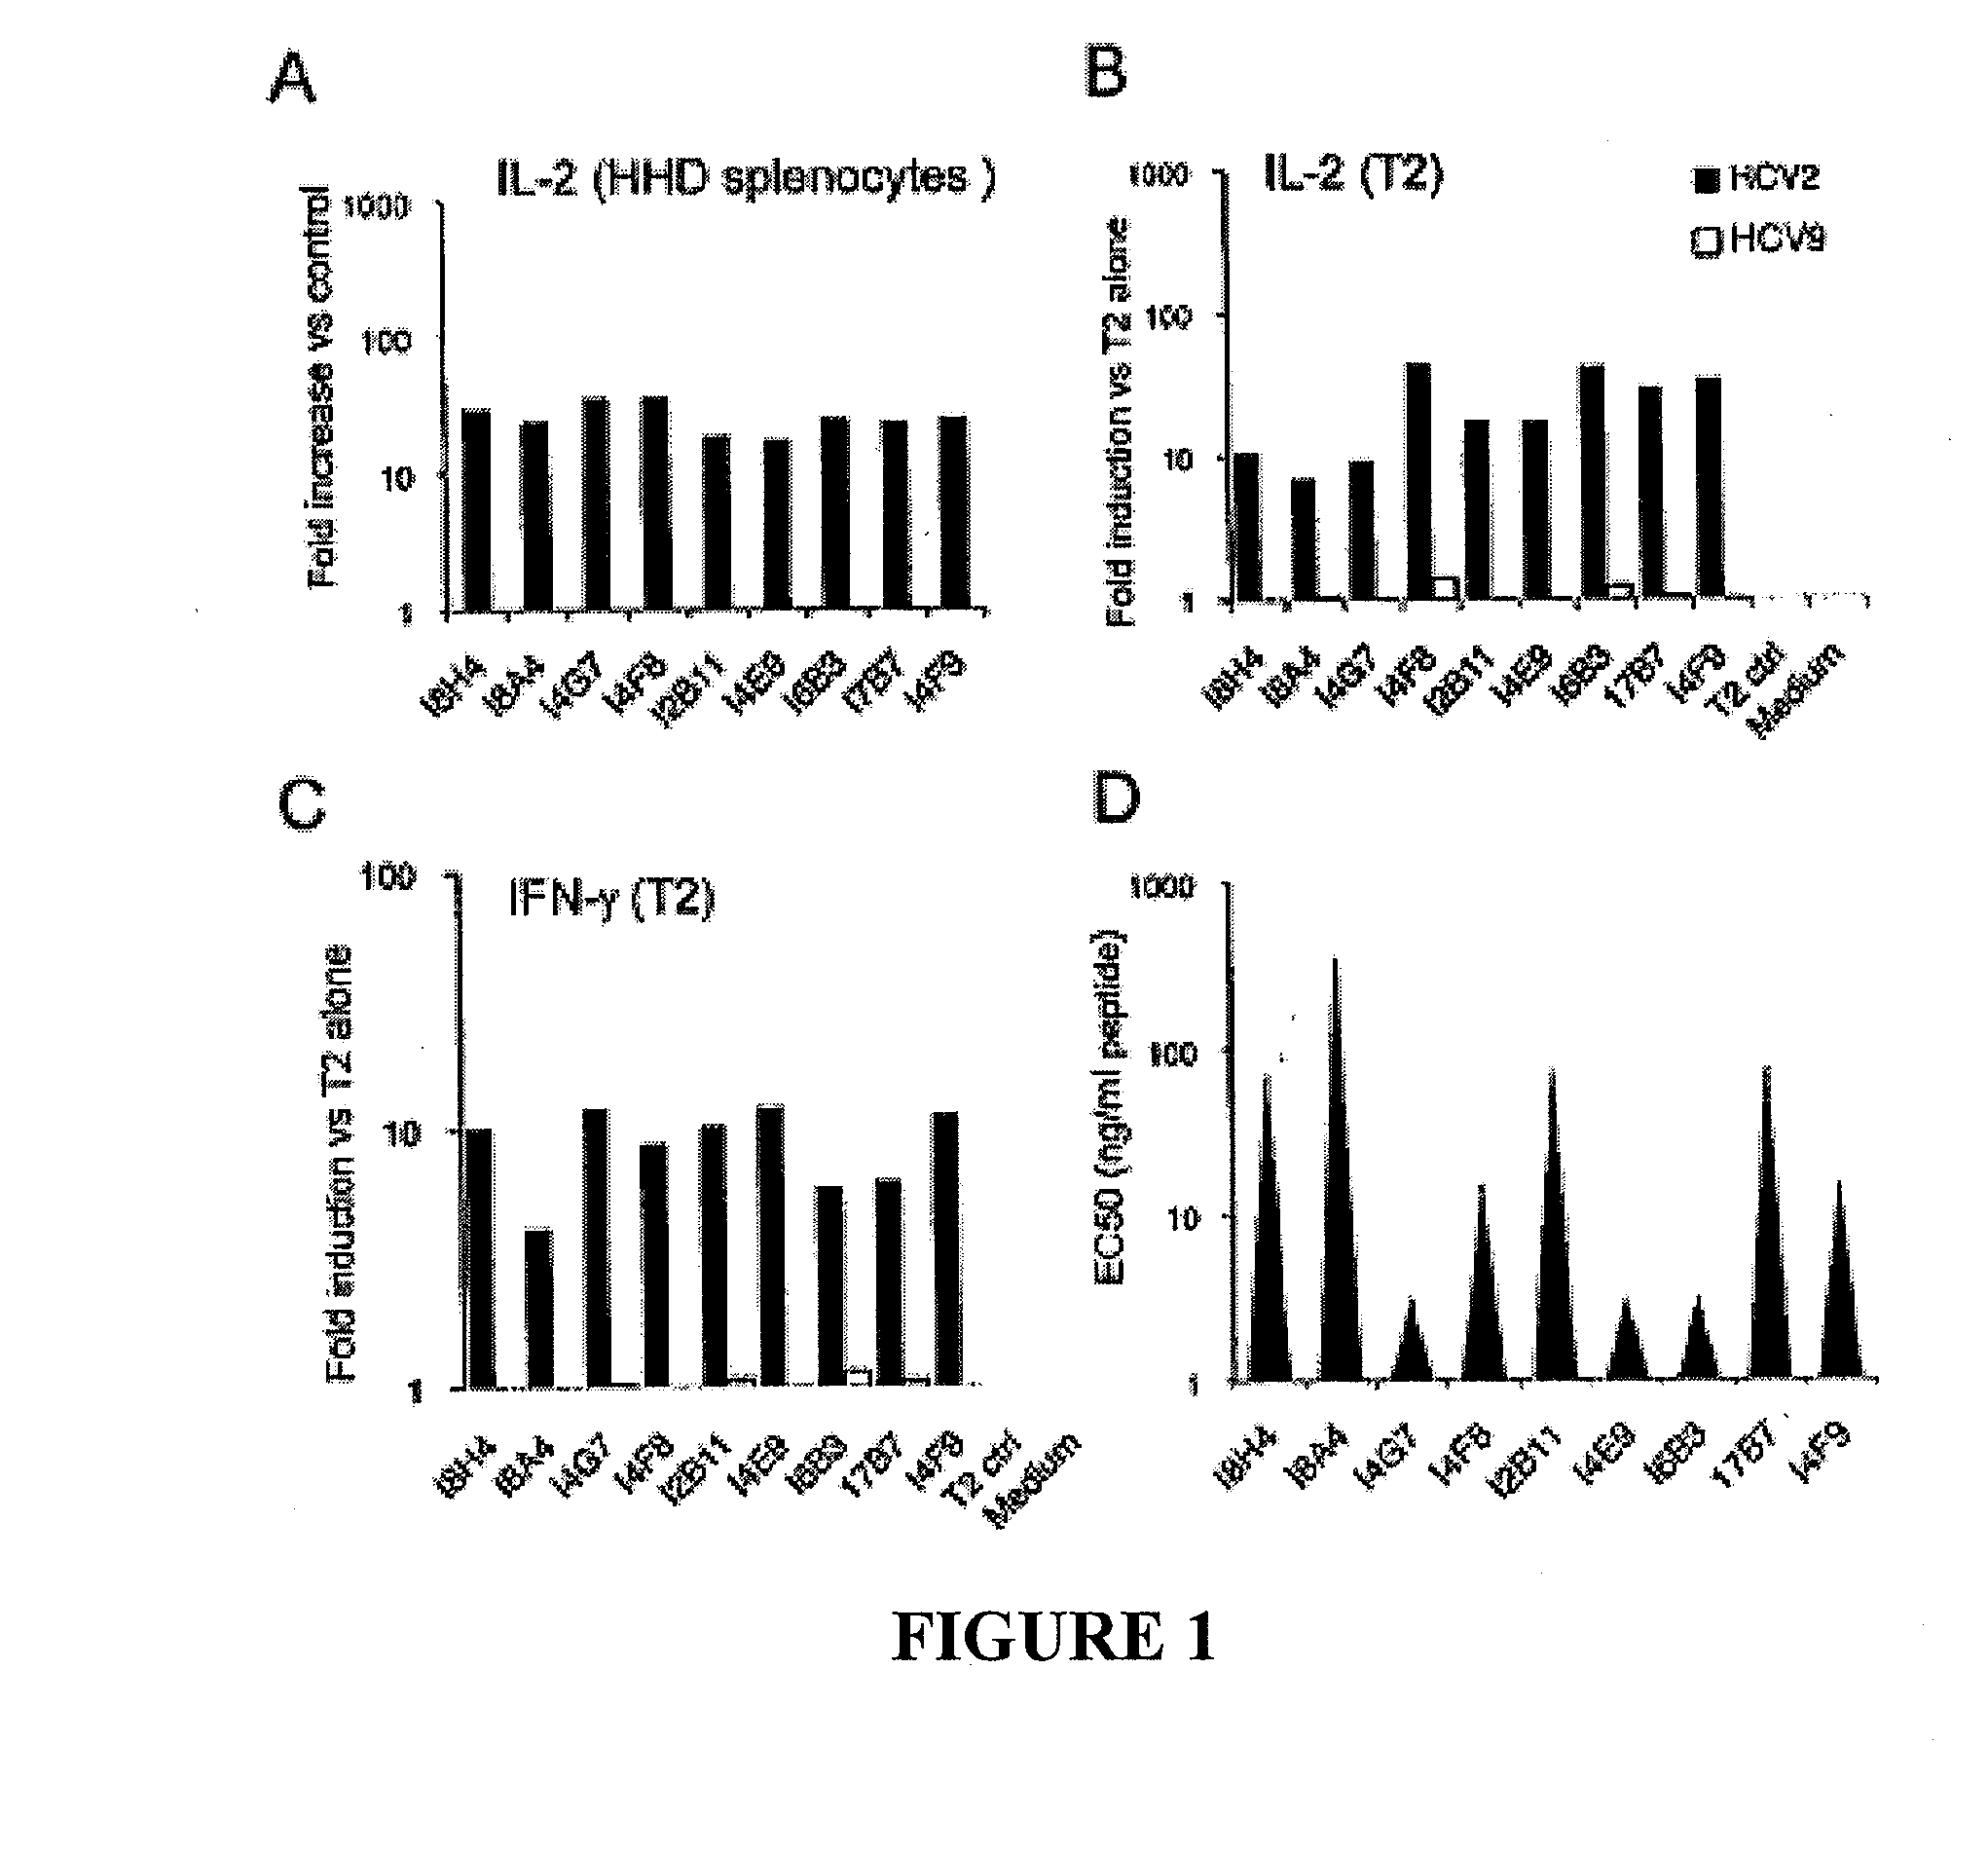 T cell receptors specific for immunodominant ctl epitopes of hcv